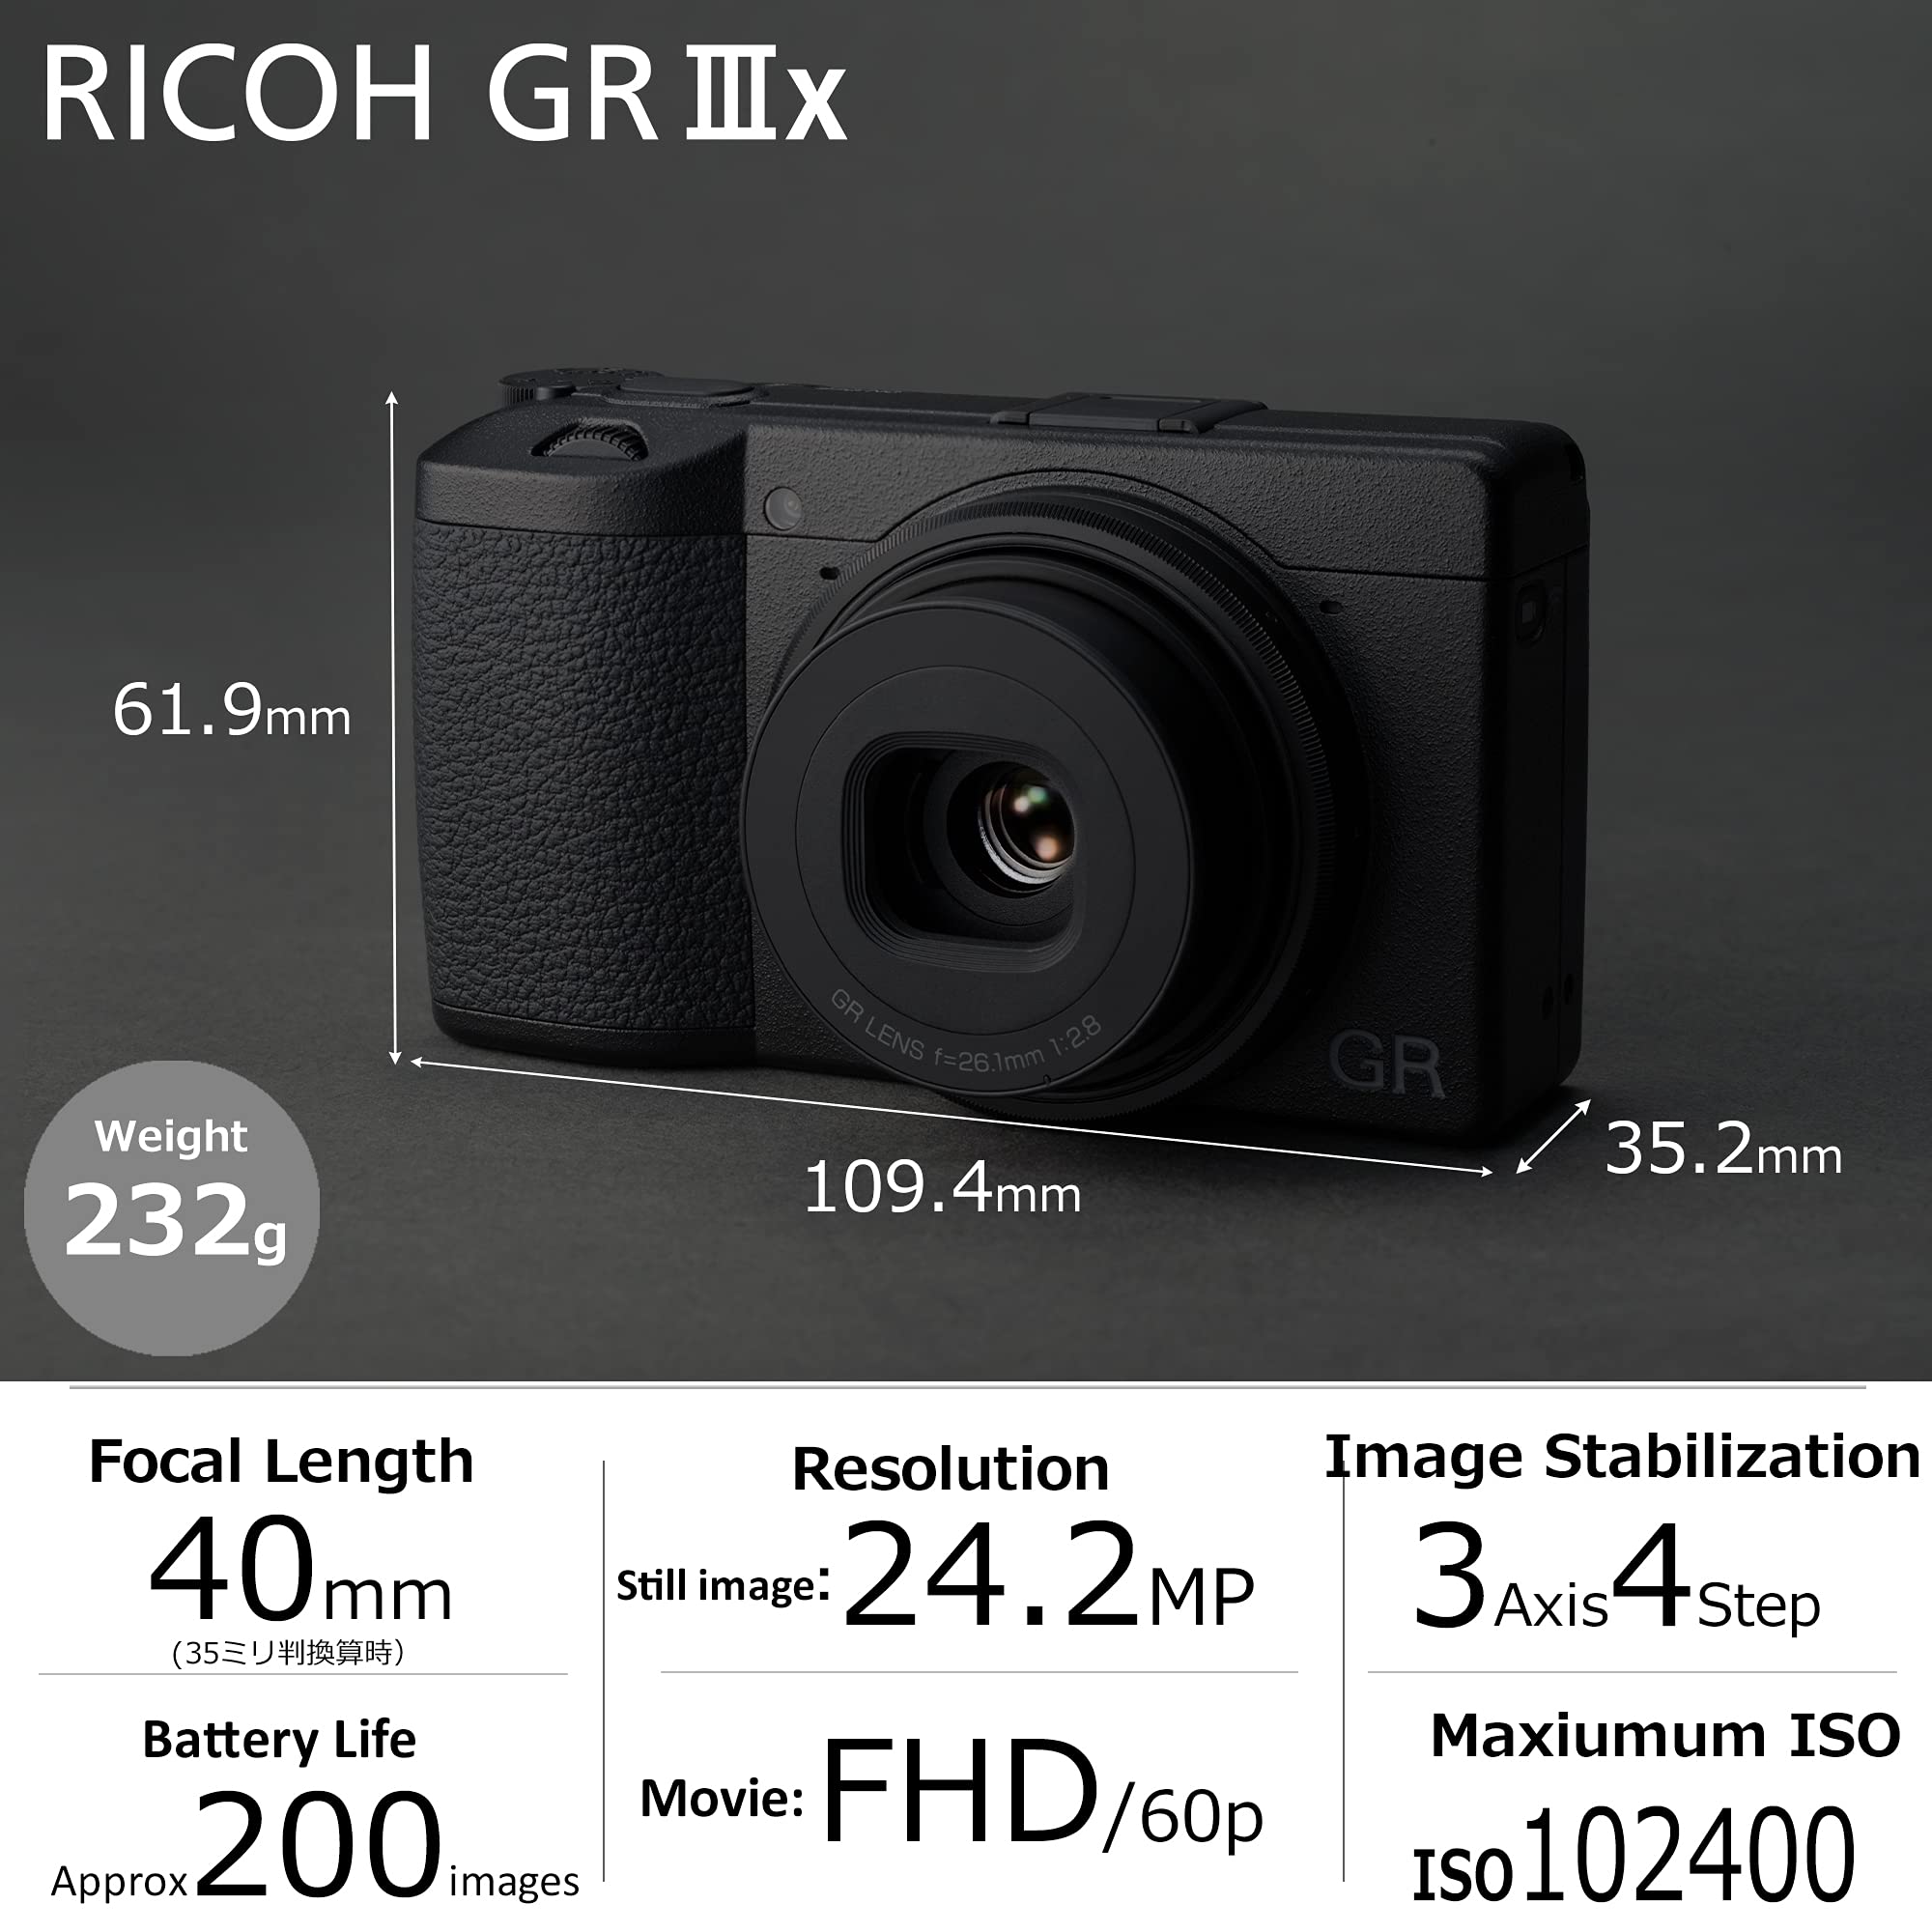 Ricoh GR IIIx, Black, Digital Compact Camera with 24MP APS-C Size CMOS Sensor, 40mmF2.8 GR Lens (in The 35mm Format)